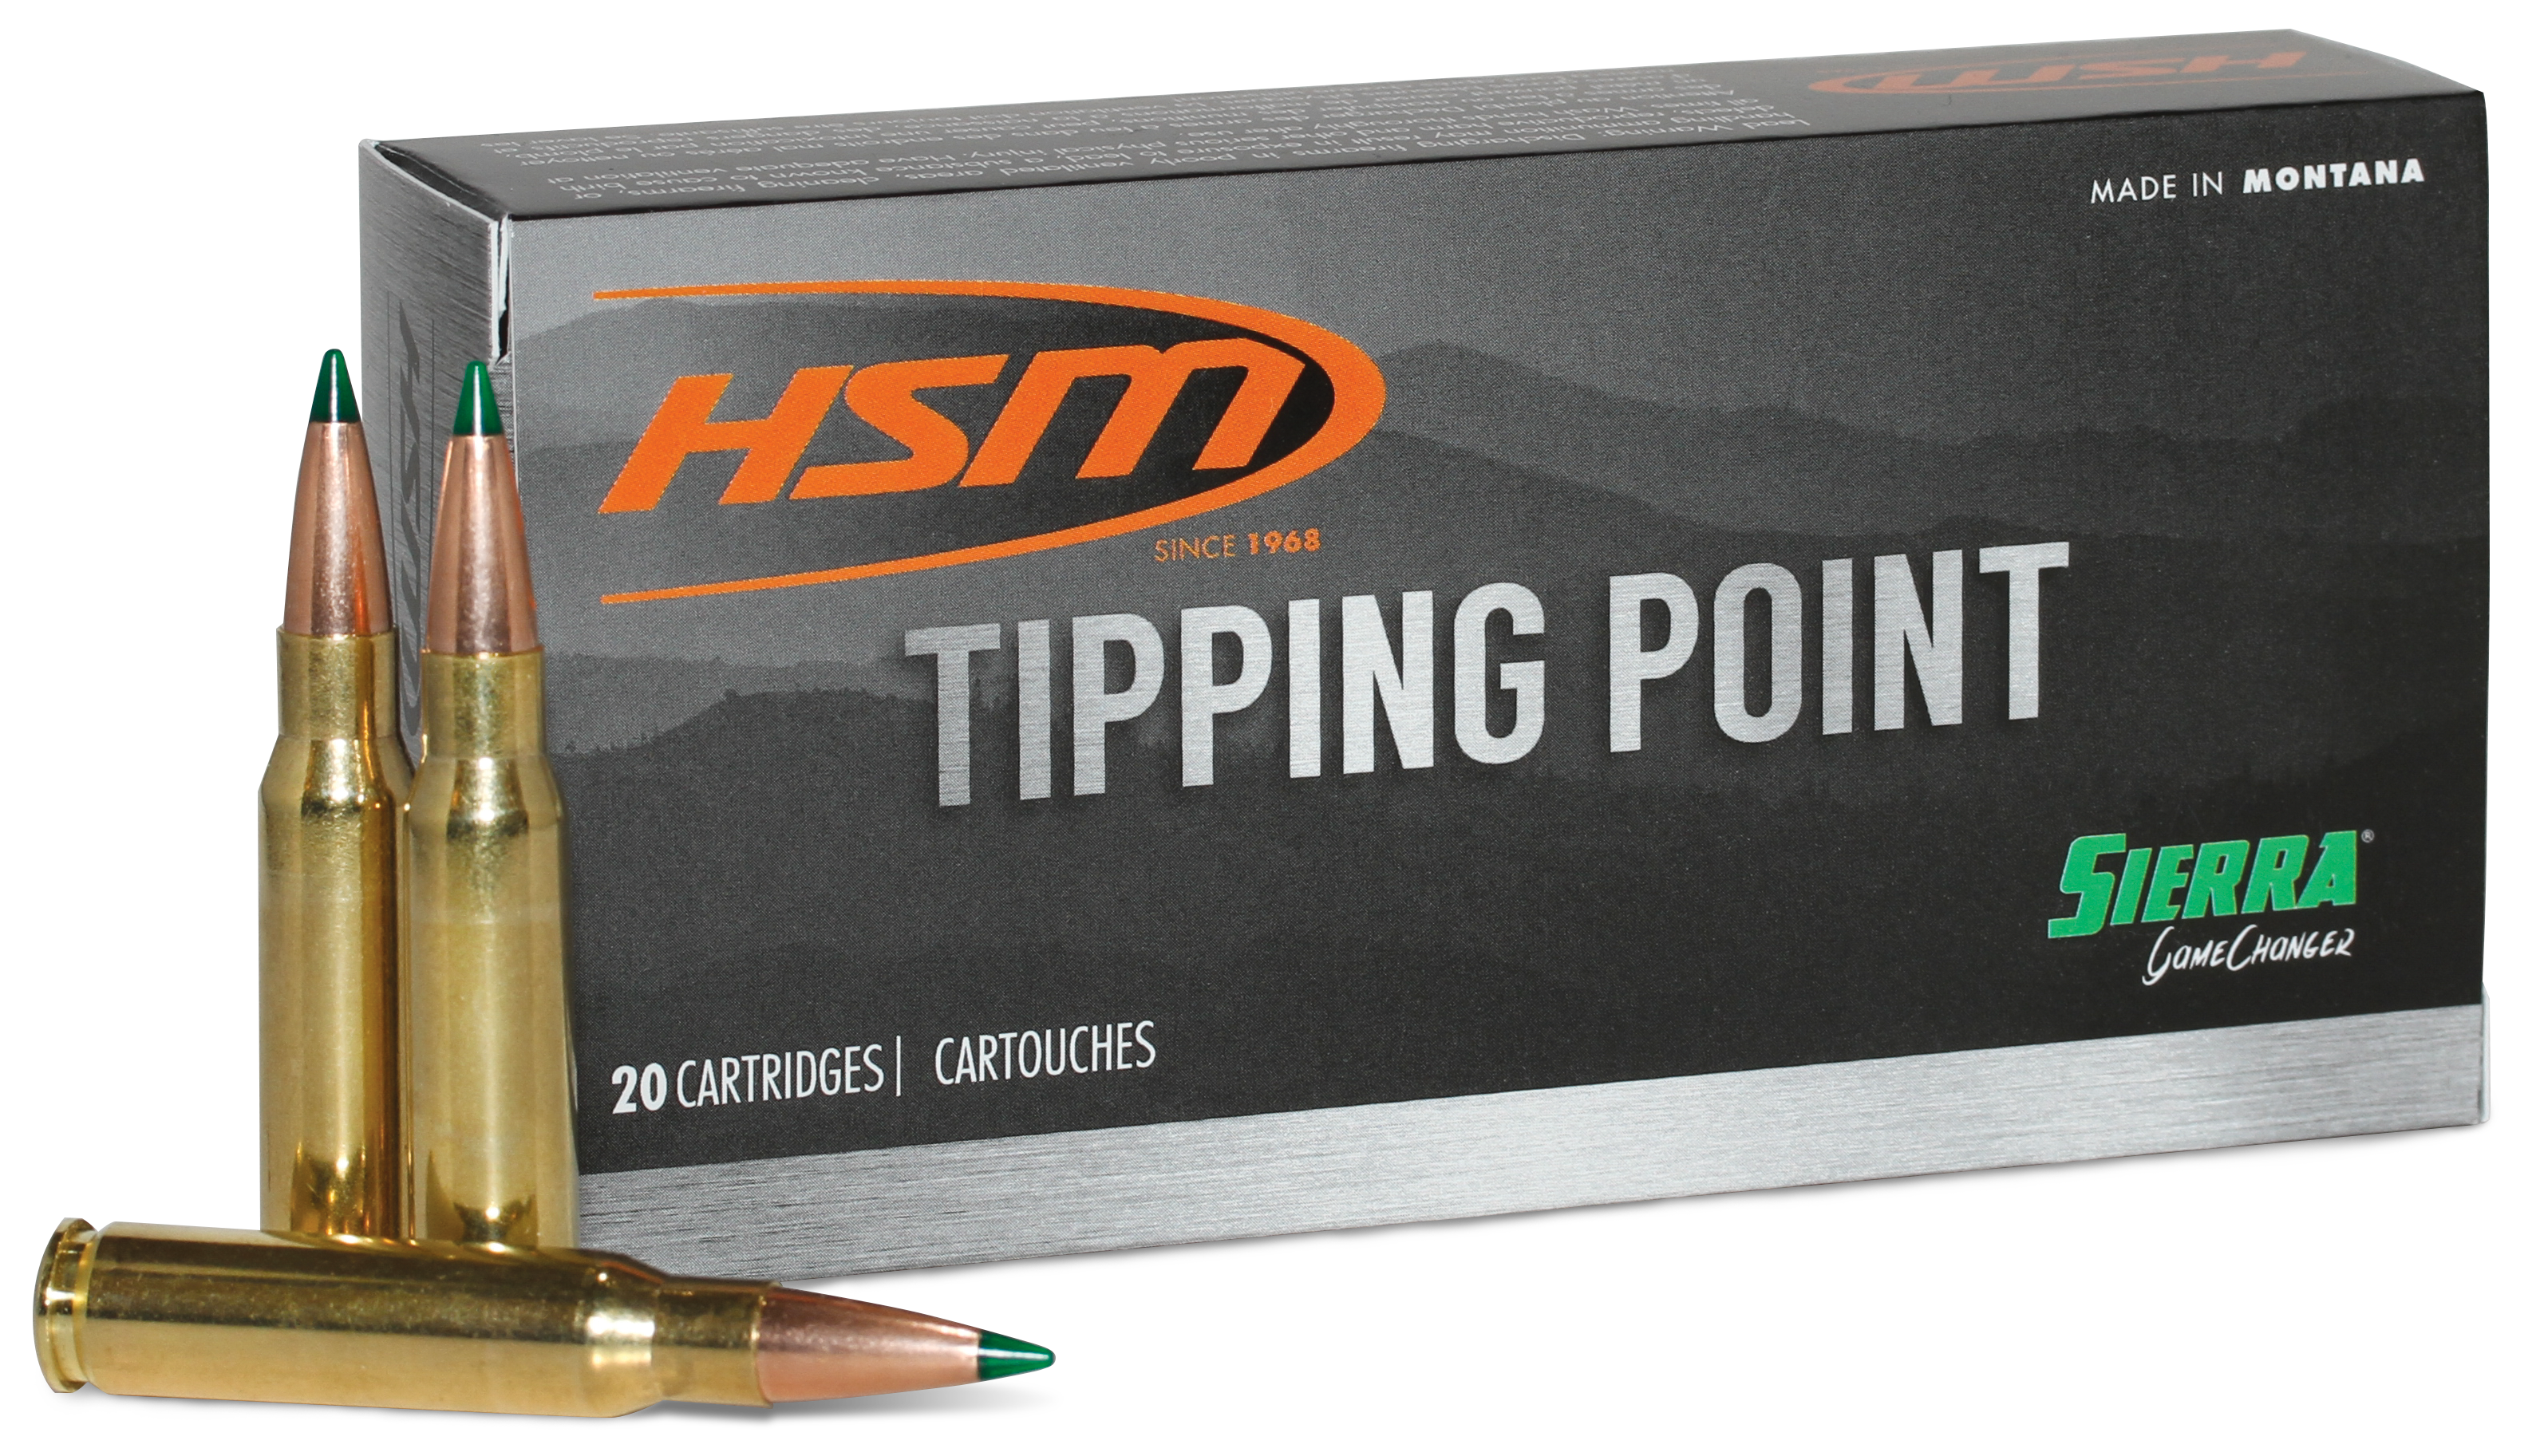 Image of Tipping Point product box and cartridges